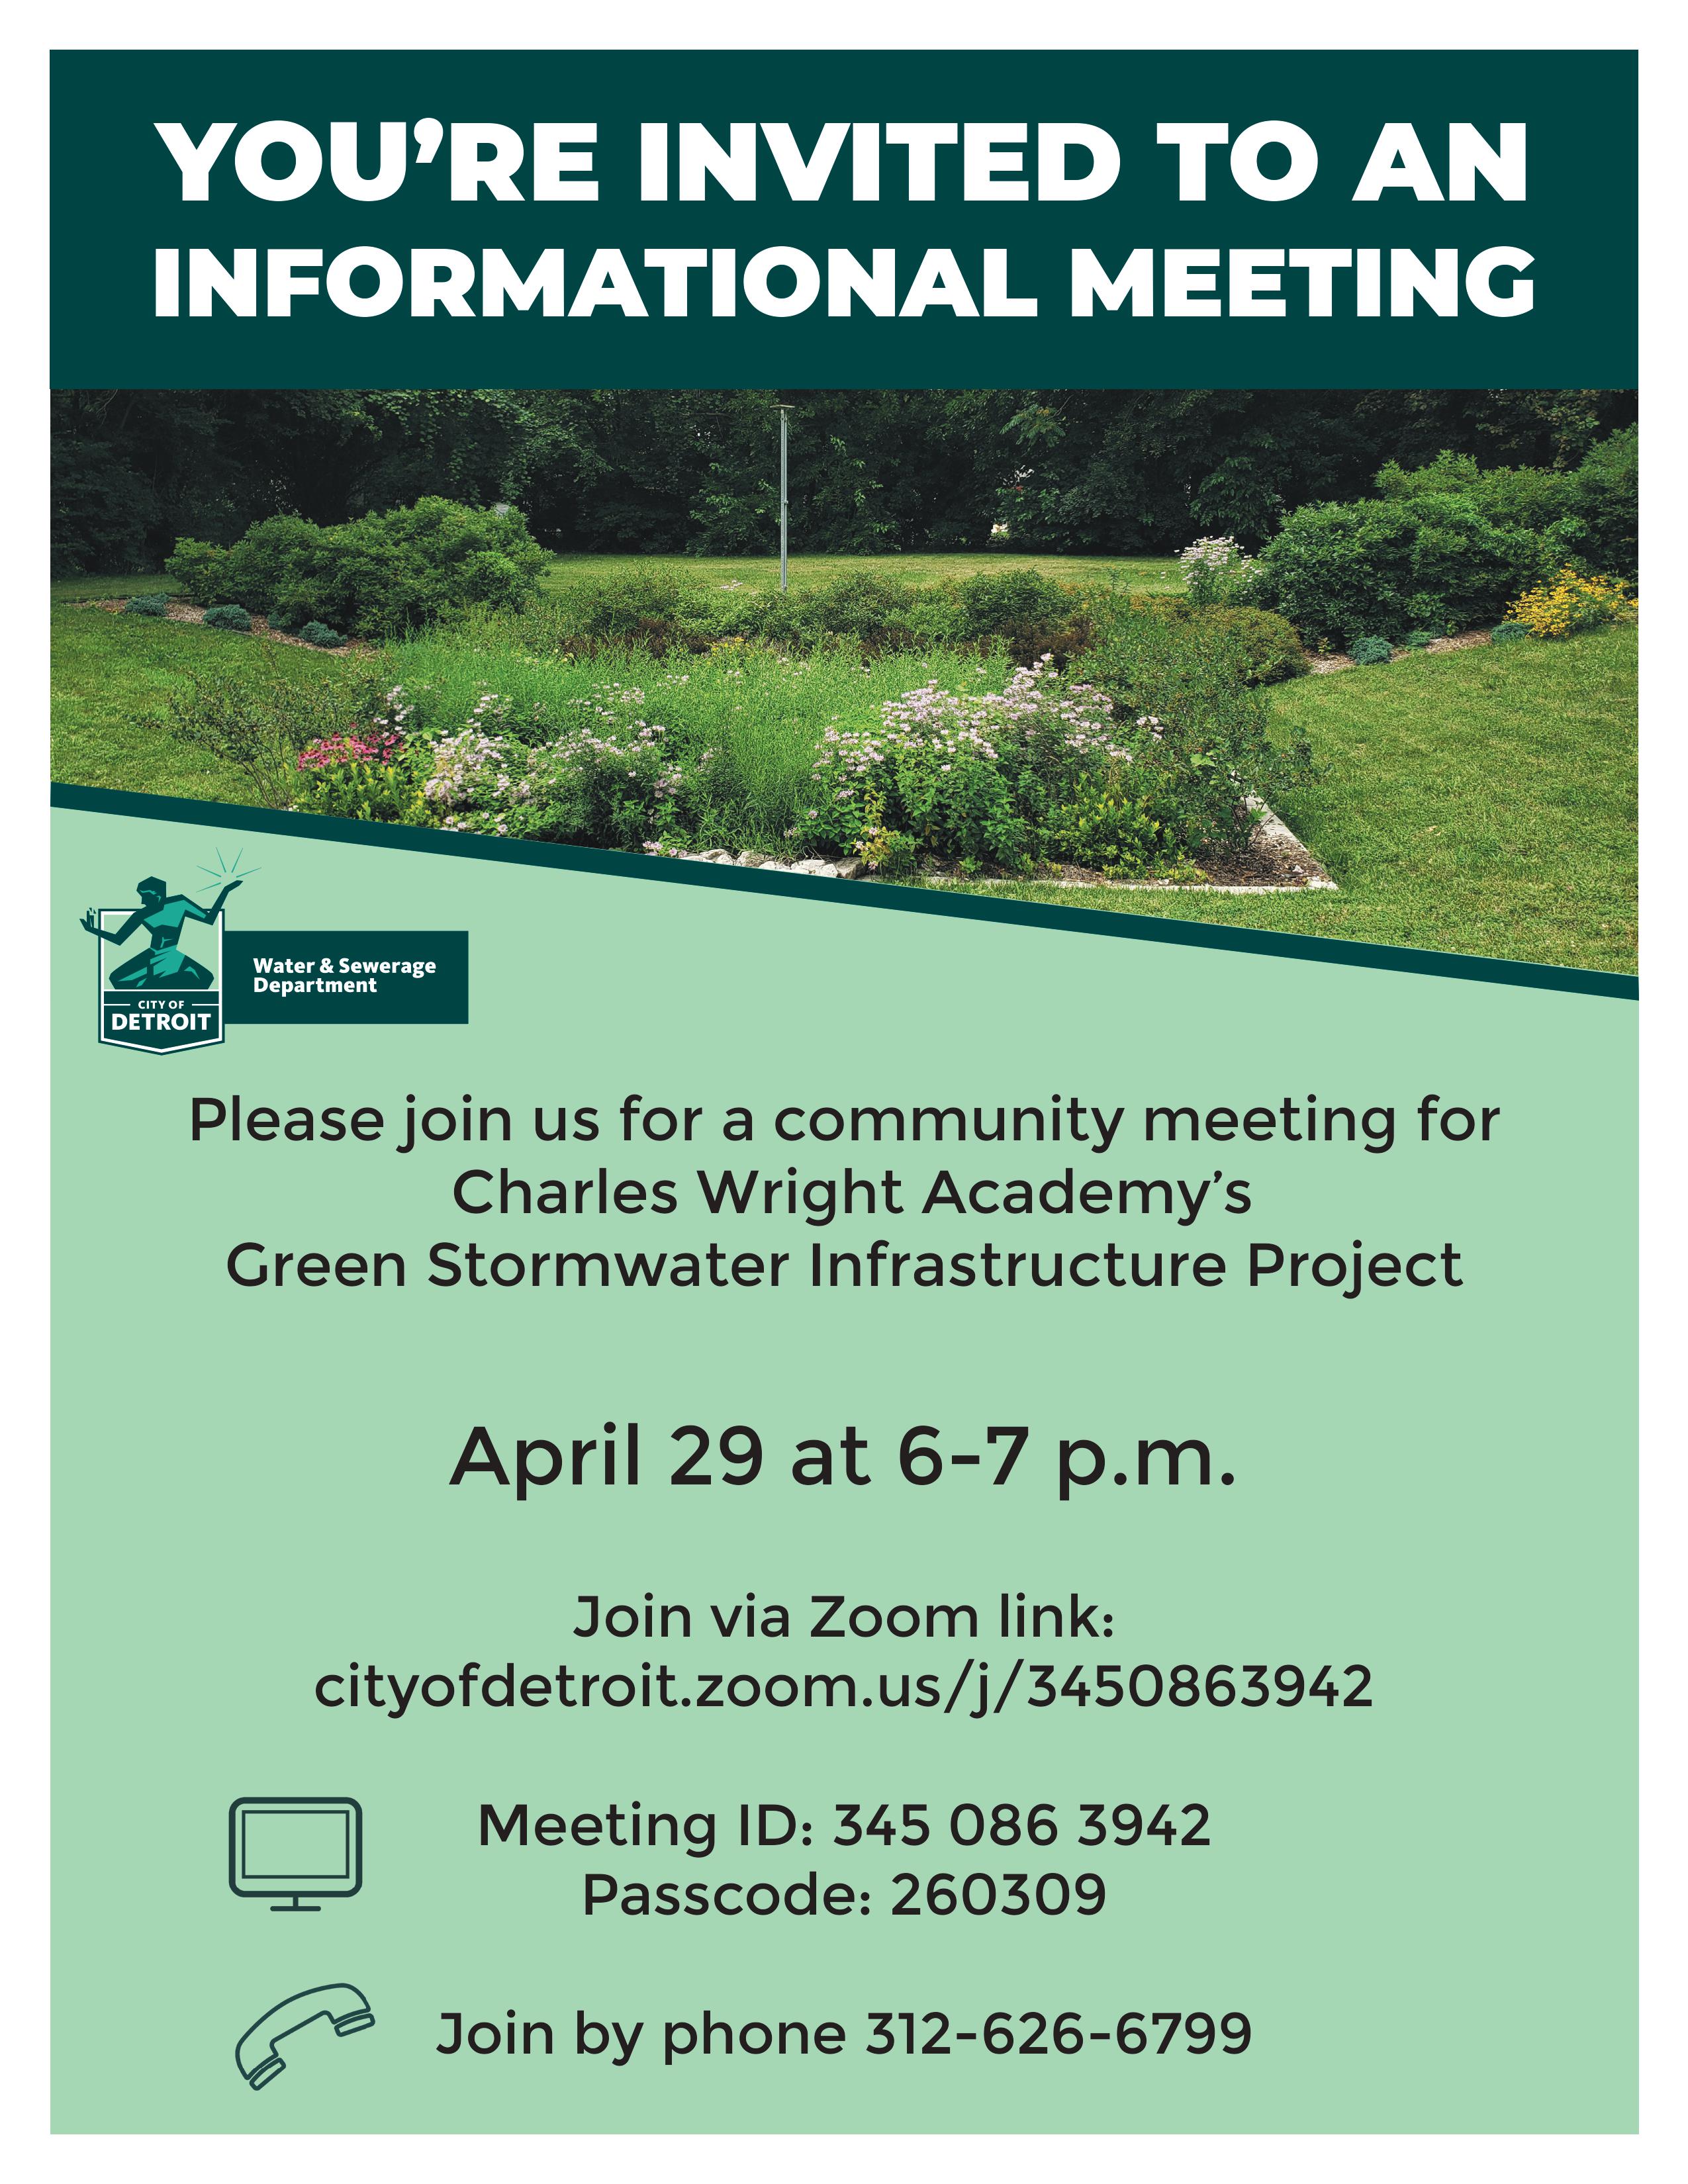 DWSD Meeting Notice: Charles Wright Academy’s Green Stormwater Infrastructure Project